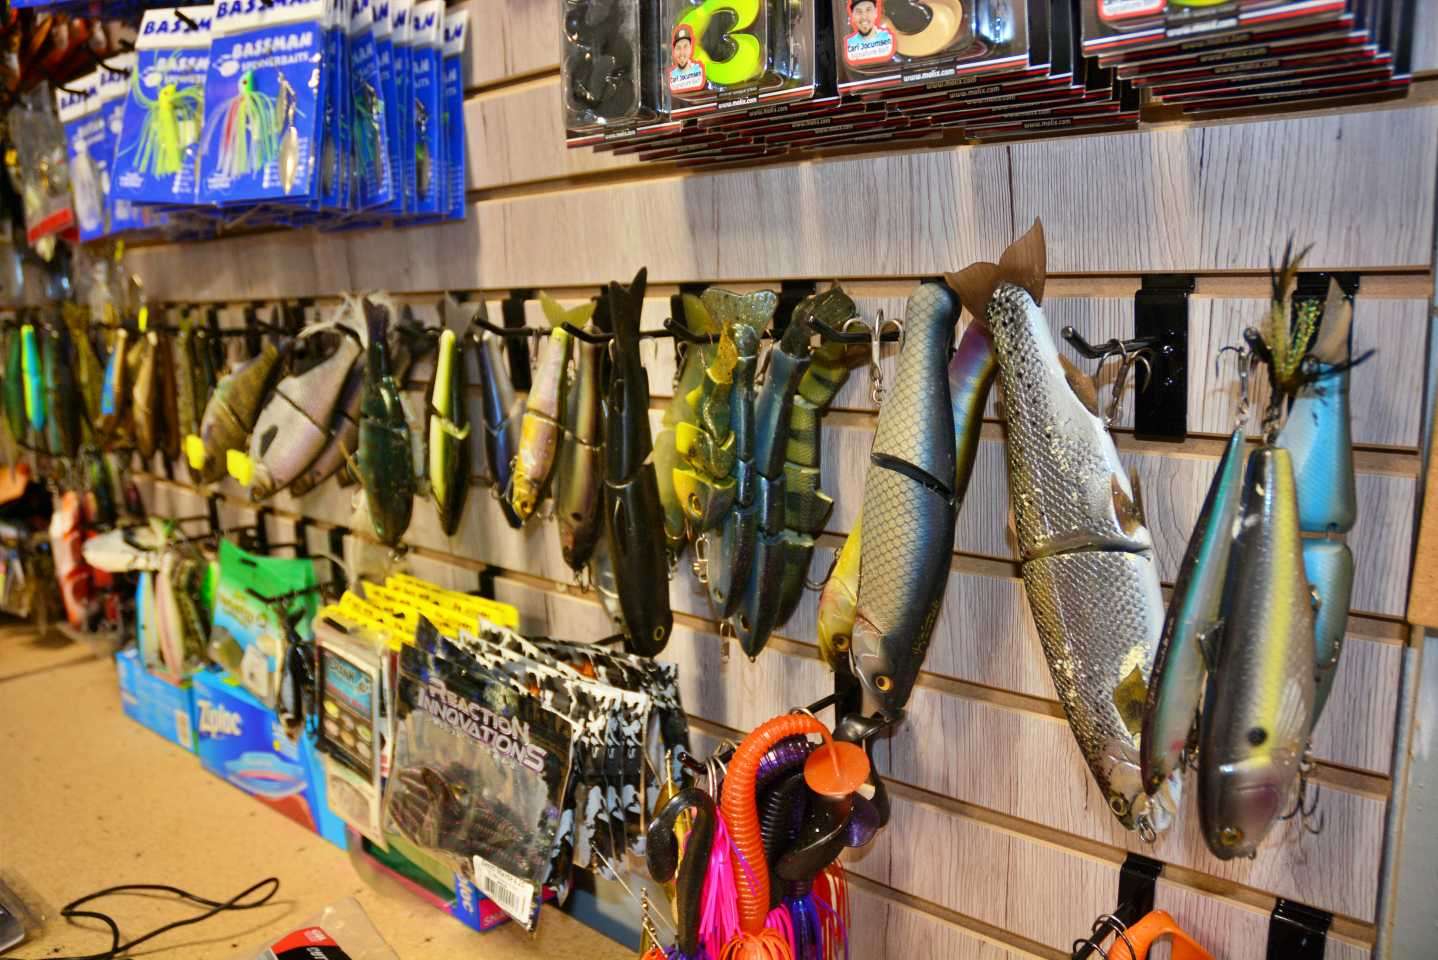 This is the wall of fame for a lineup of swimbaits that include California designed models made just for Carl. 